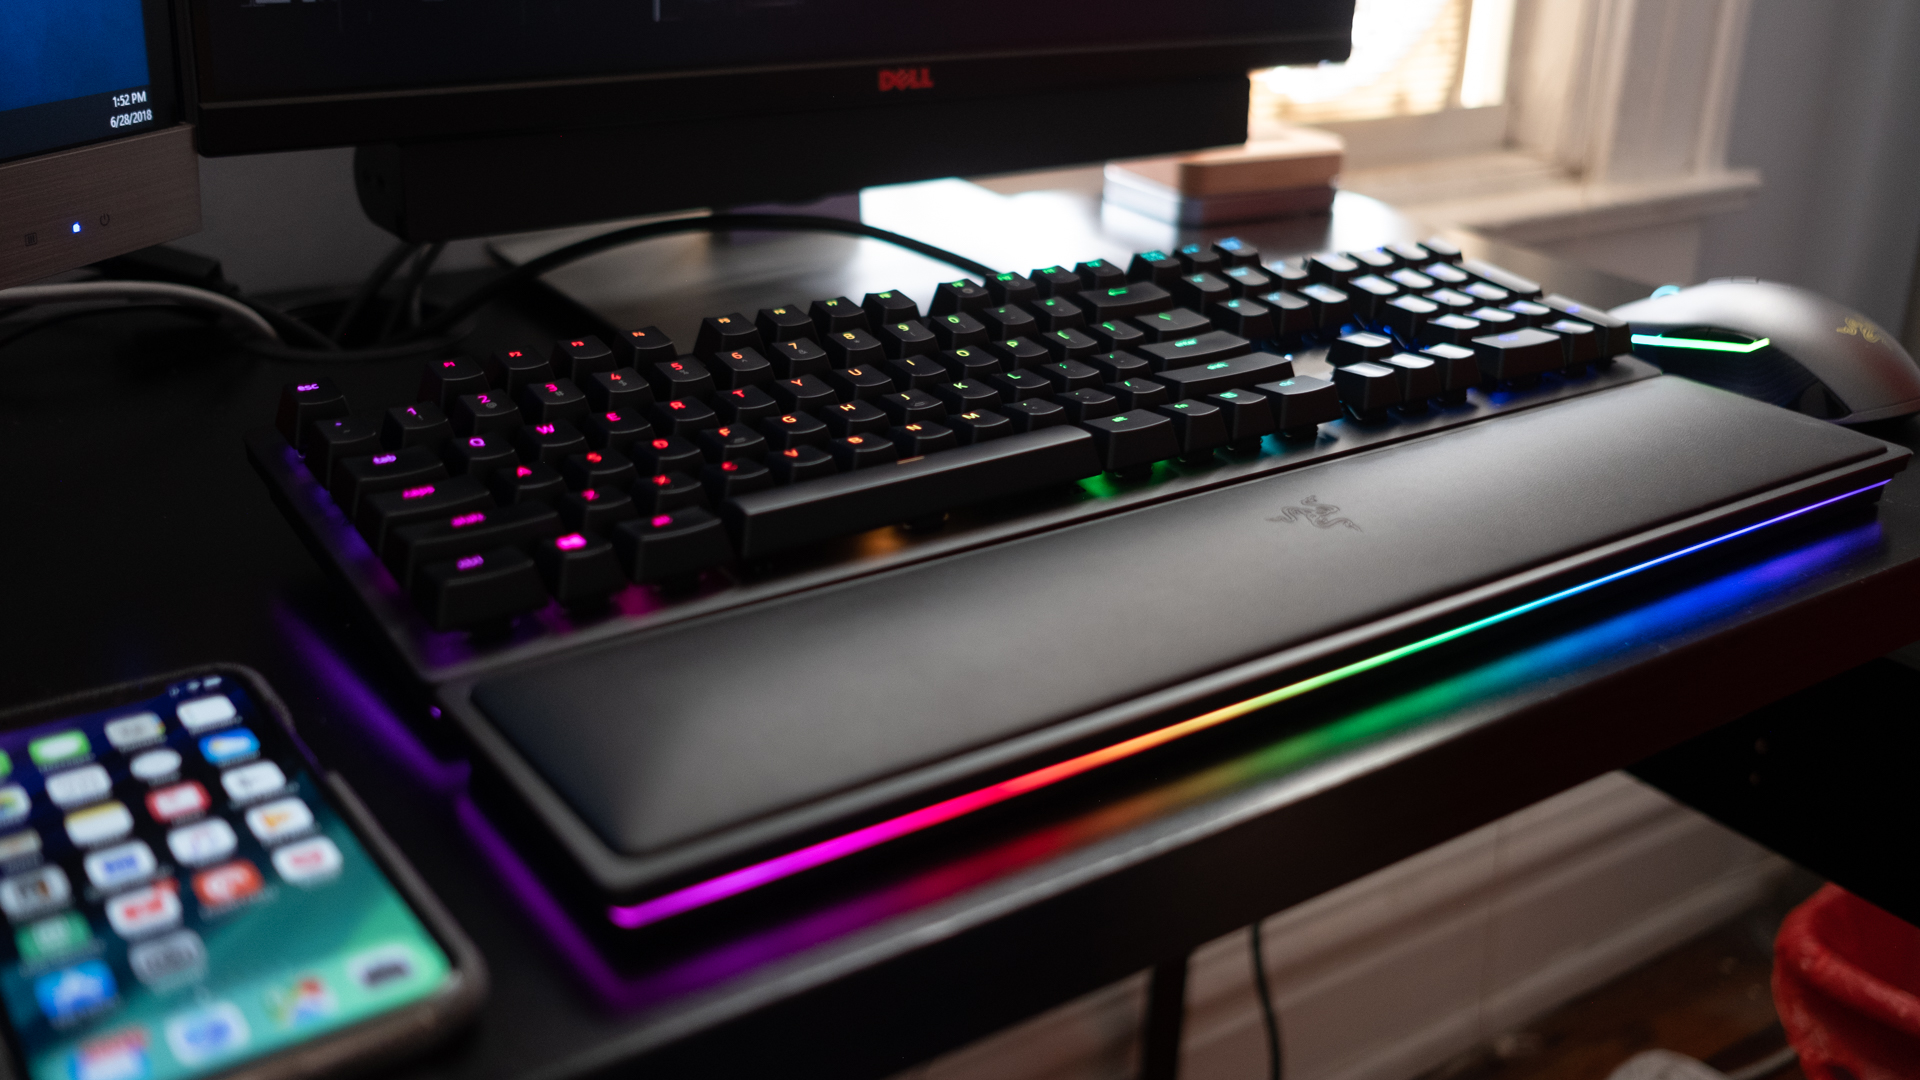 Simple Best Razer Keyboard Gaming with Epic Design ideas Best Gaming